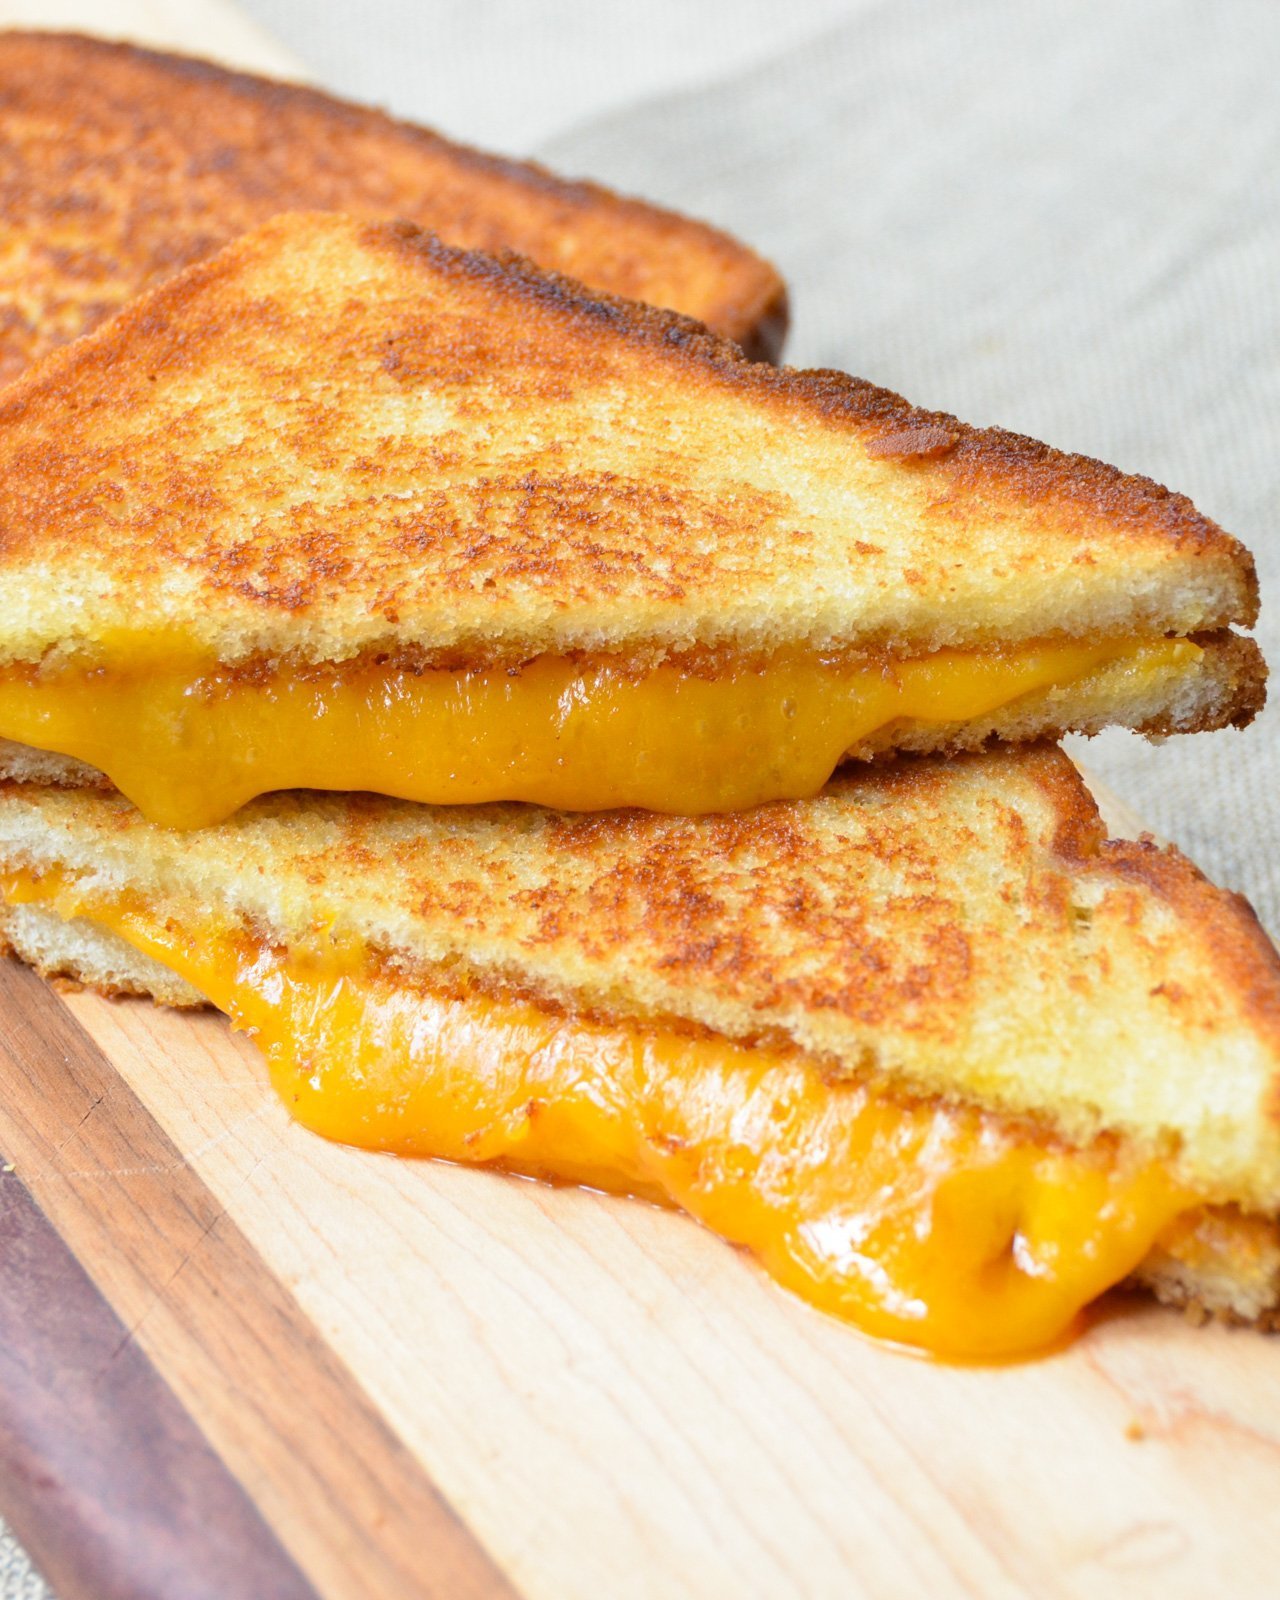 https://bluejeanchef.com/uploads/2016/03/Grilled-Cheese-1280-36.jpg